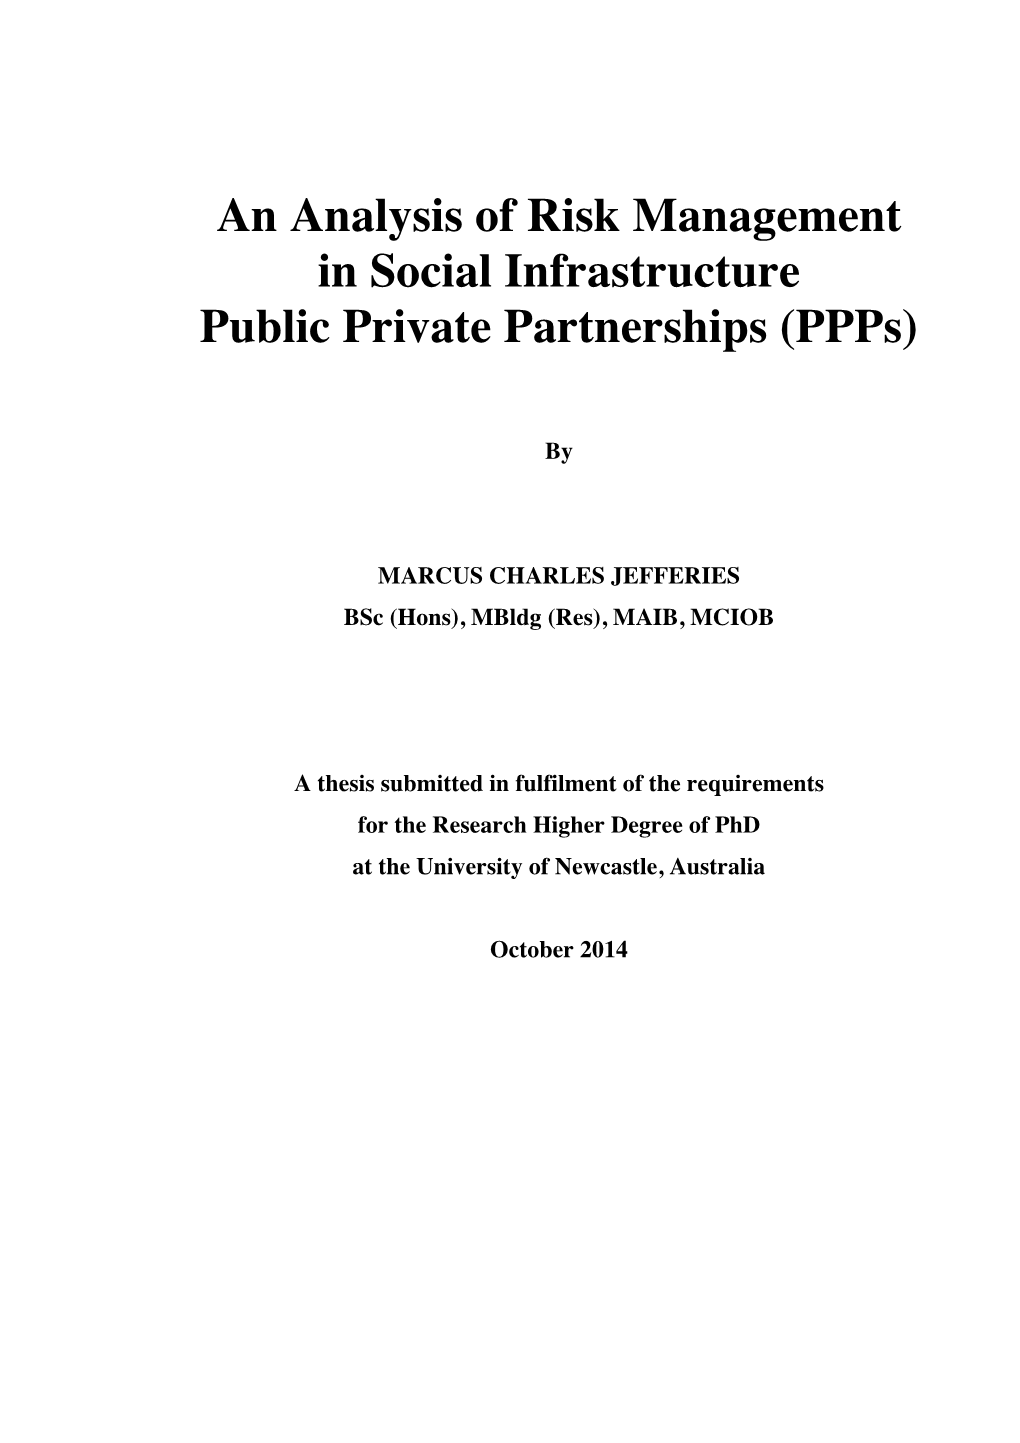 An Analysis of Risk Management in Social Infrastructure Public Private Partnerships (Ppps)